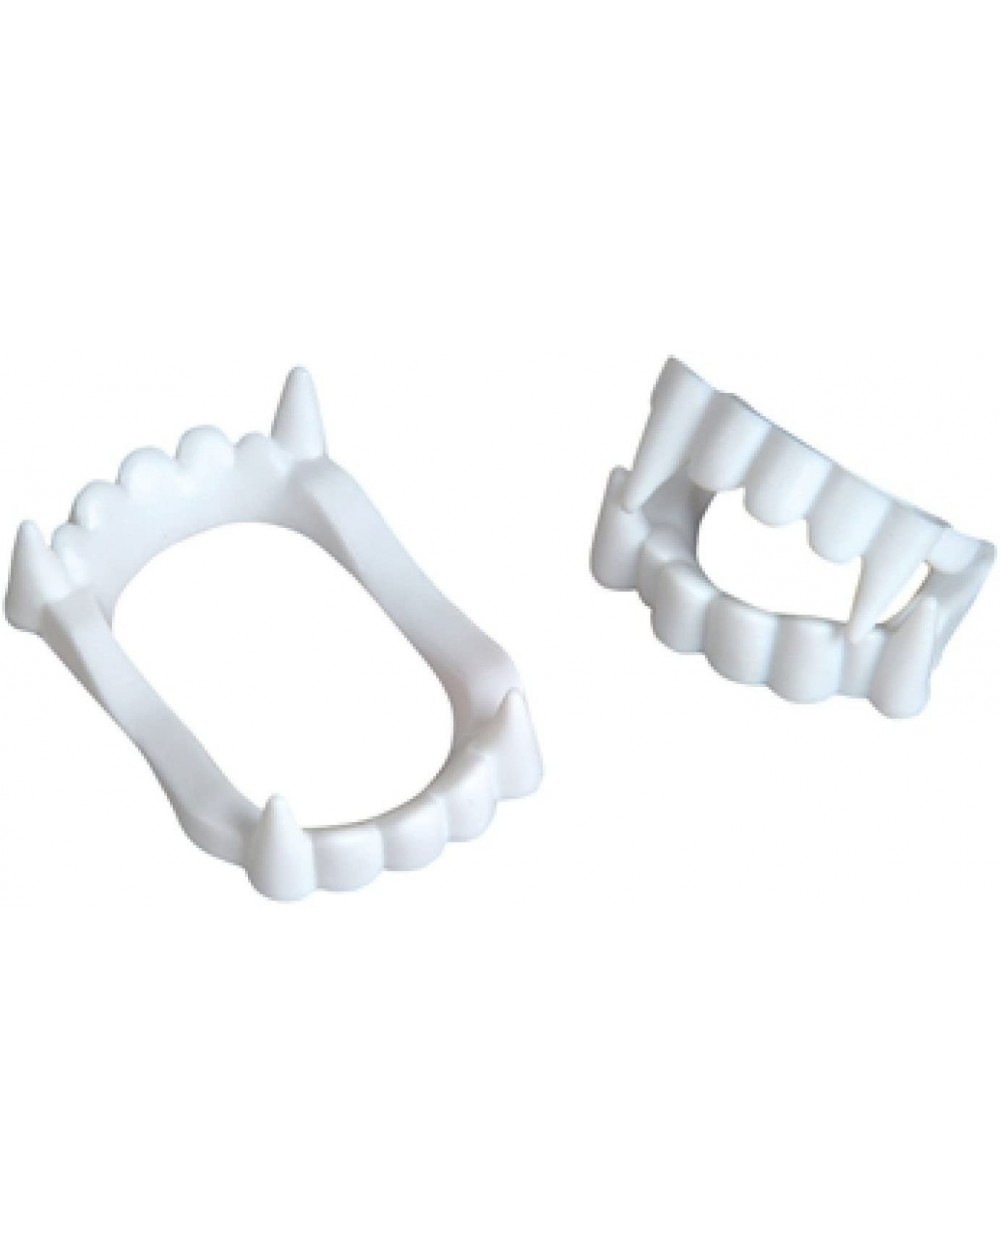 Party Favors 24 White Vampire Fangs- Plastic Teeth- Costume Accessory Halloween Party Favors - CF12N24EYYD $9.13